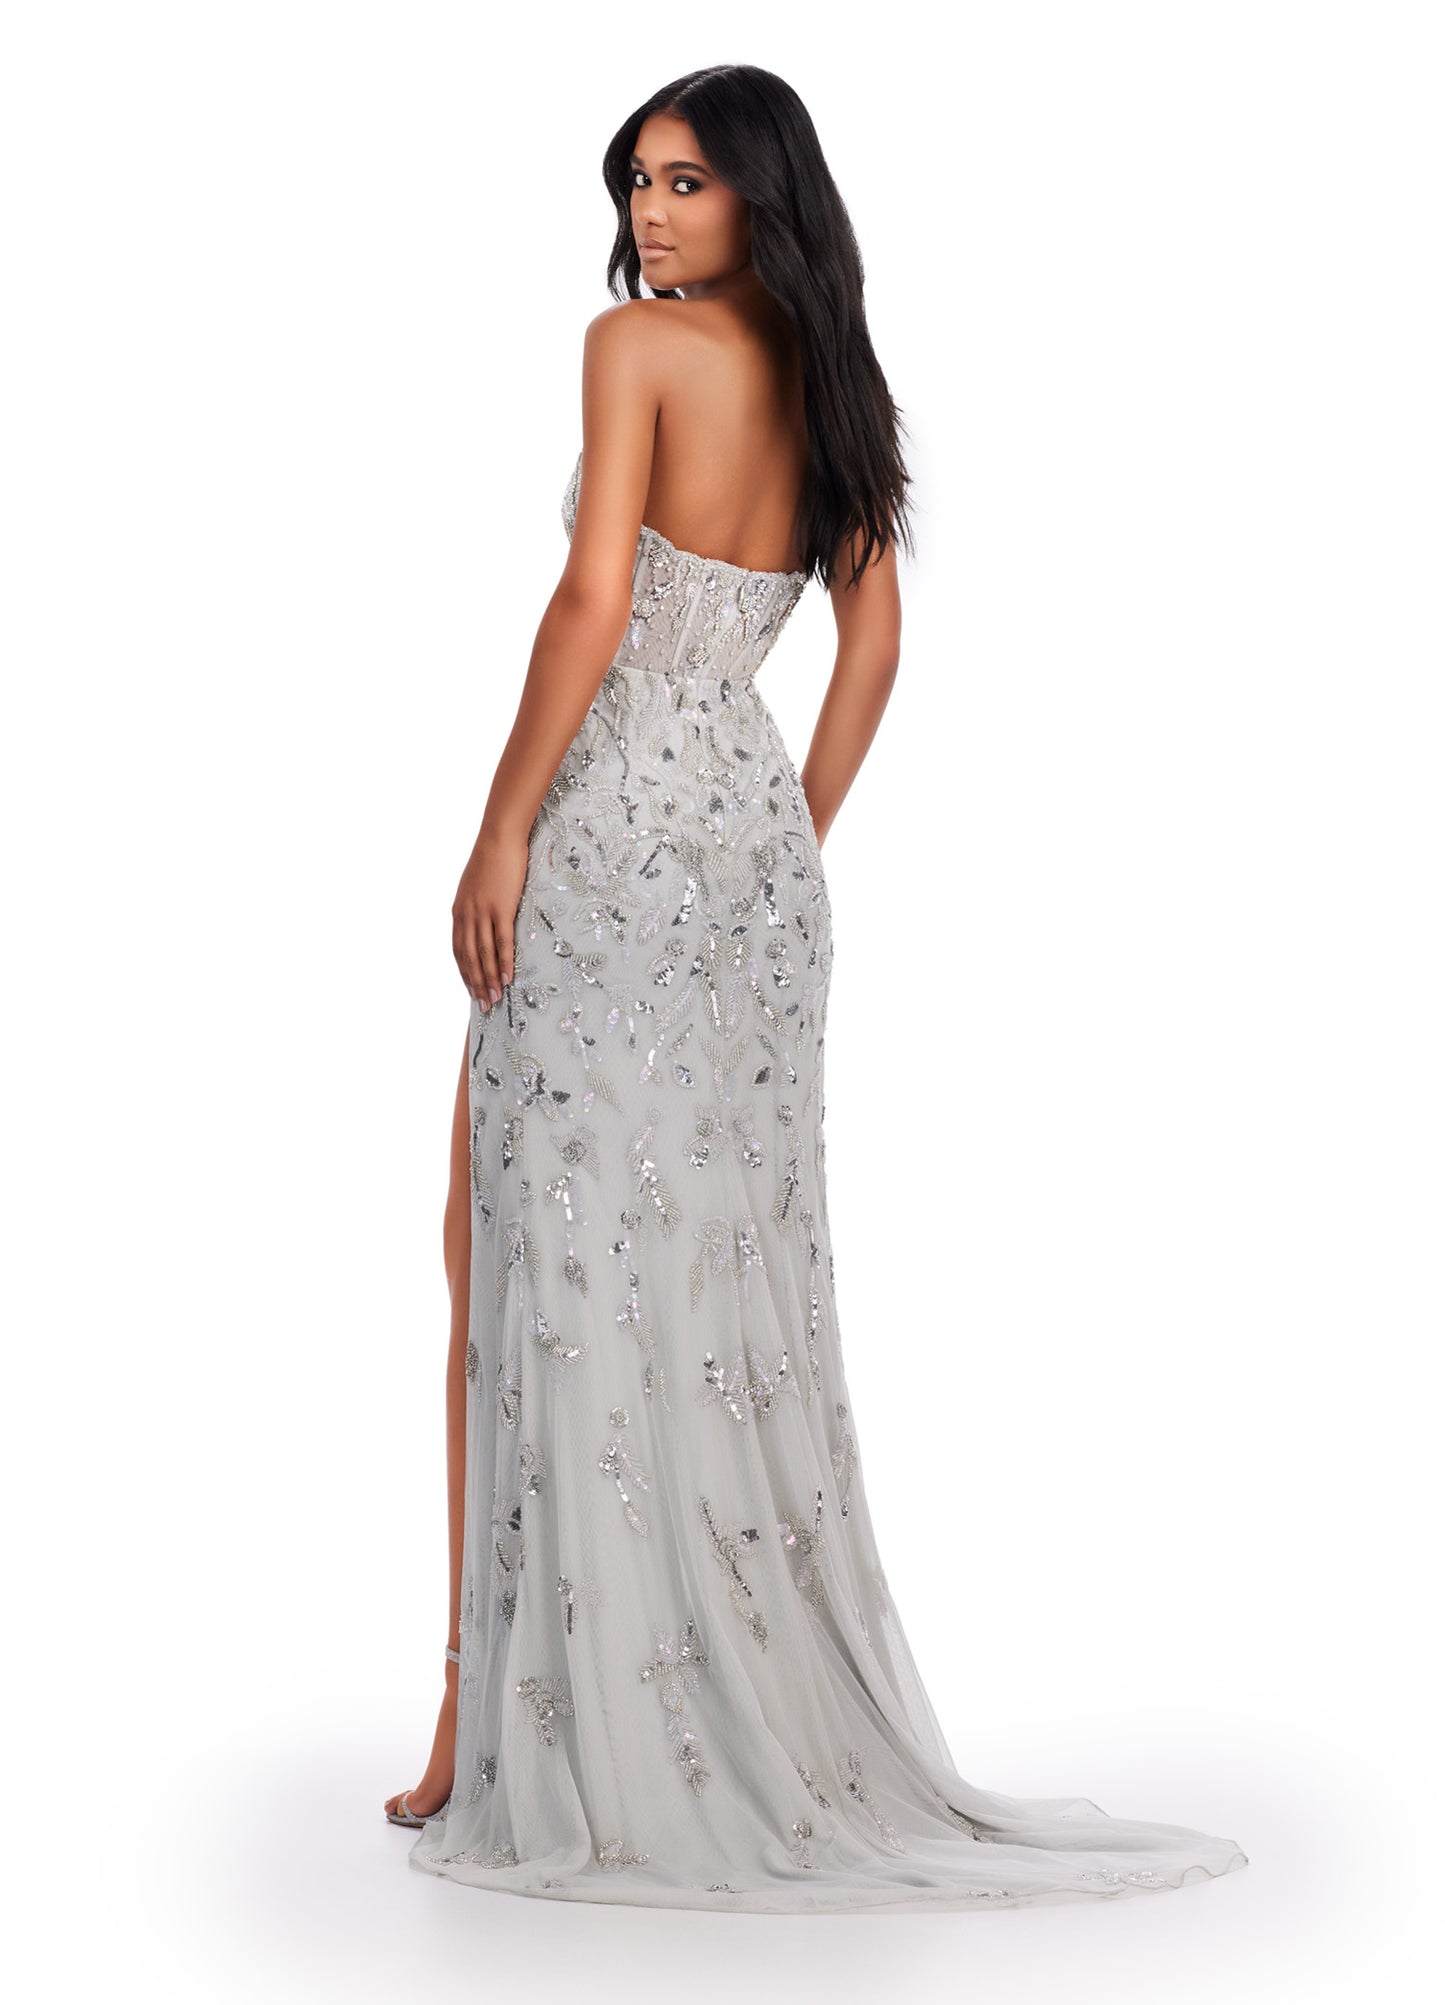 Achieve a stunning look with Ashley Lauren's 11614 Long Prom Dress. The beaded strapless gown features a corset bustier and a slit, adding a touch of elegance to its formal pageant style. Confidently stand out and make a statement at your special occasion. Feel like royalty in this elegant gown. This fully beaded design features an illusion corset bustier. The beading flows throughout the gown, which has a left leg slit.